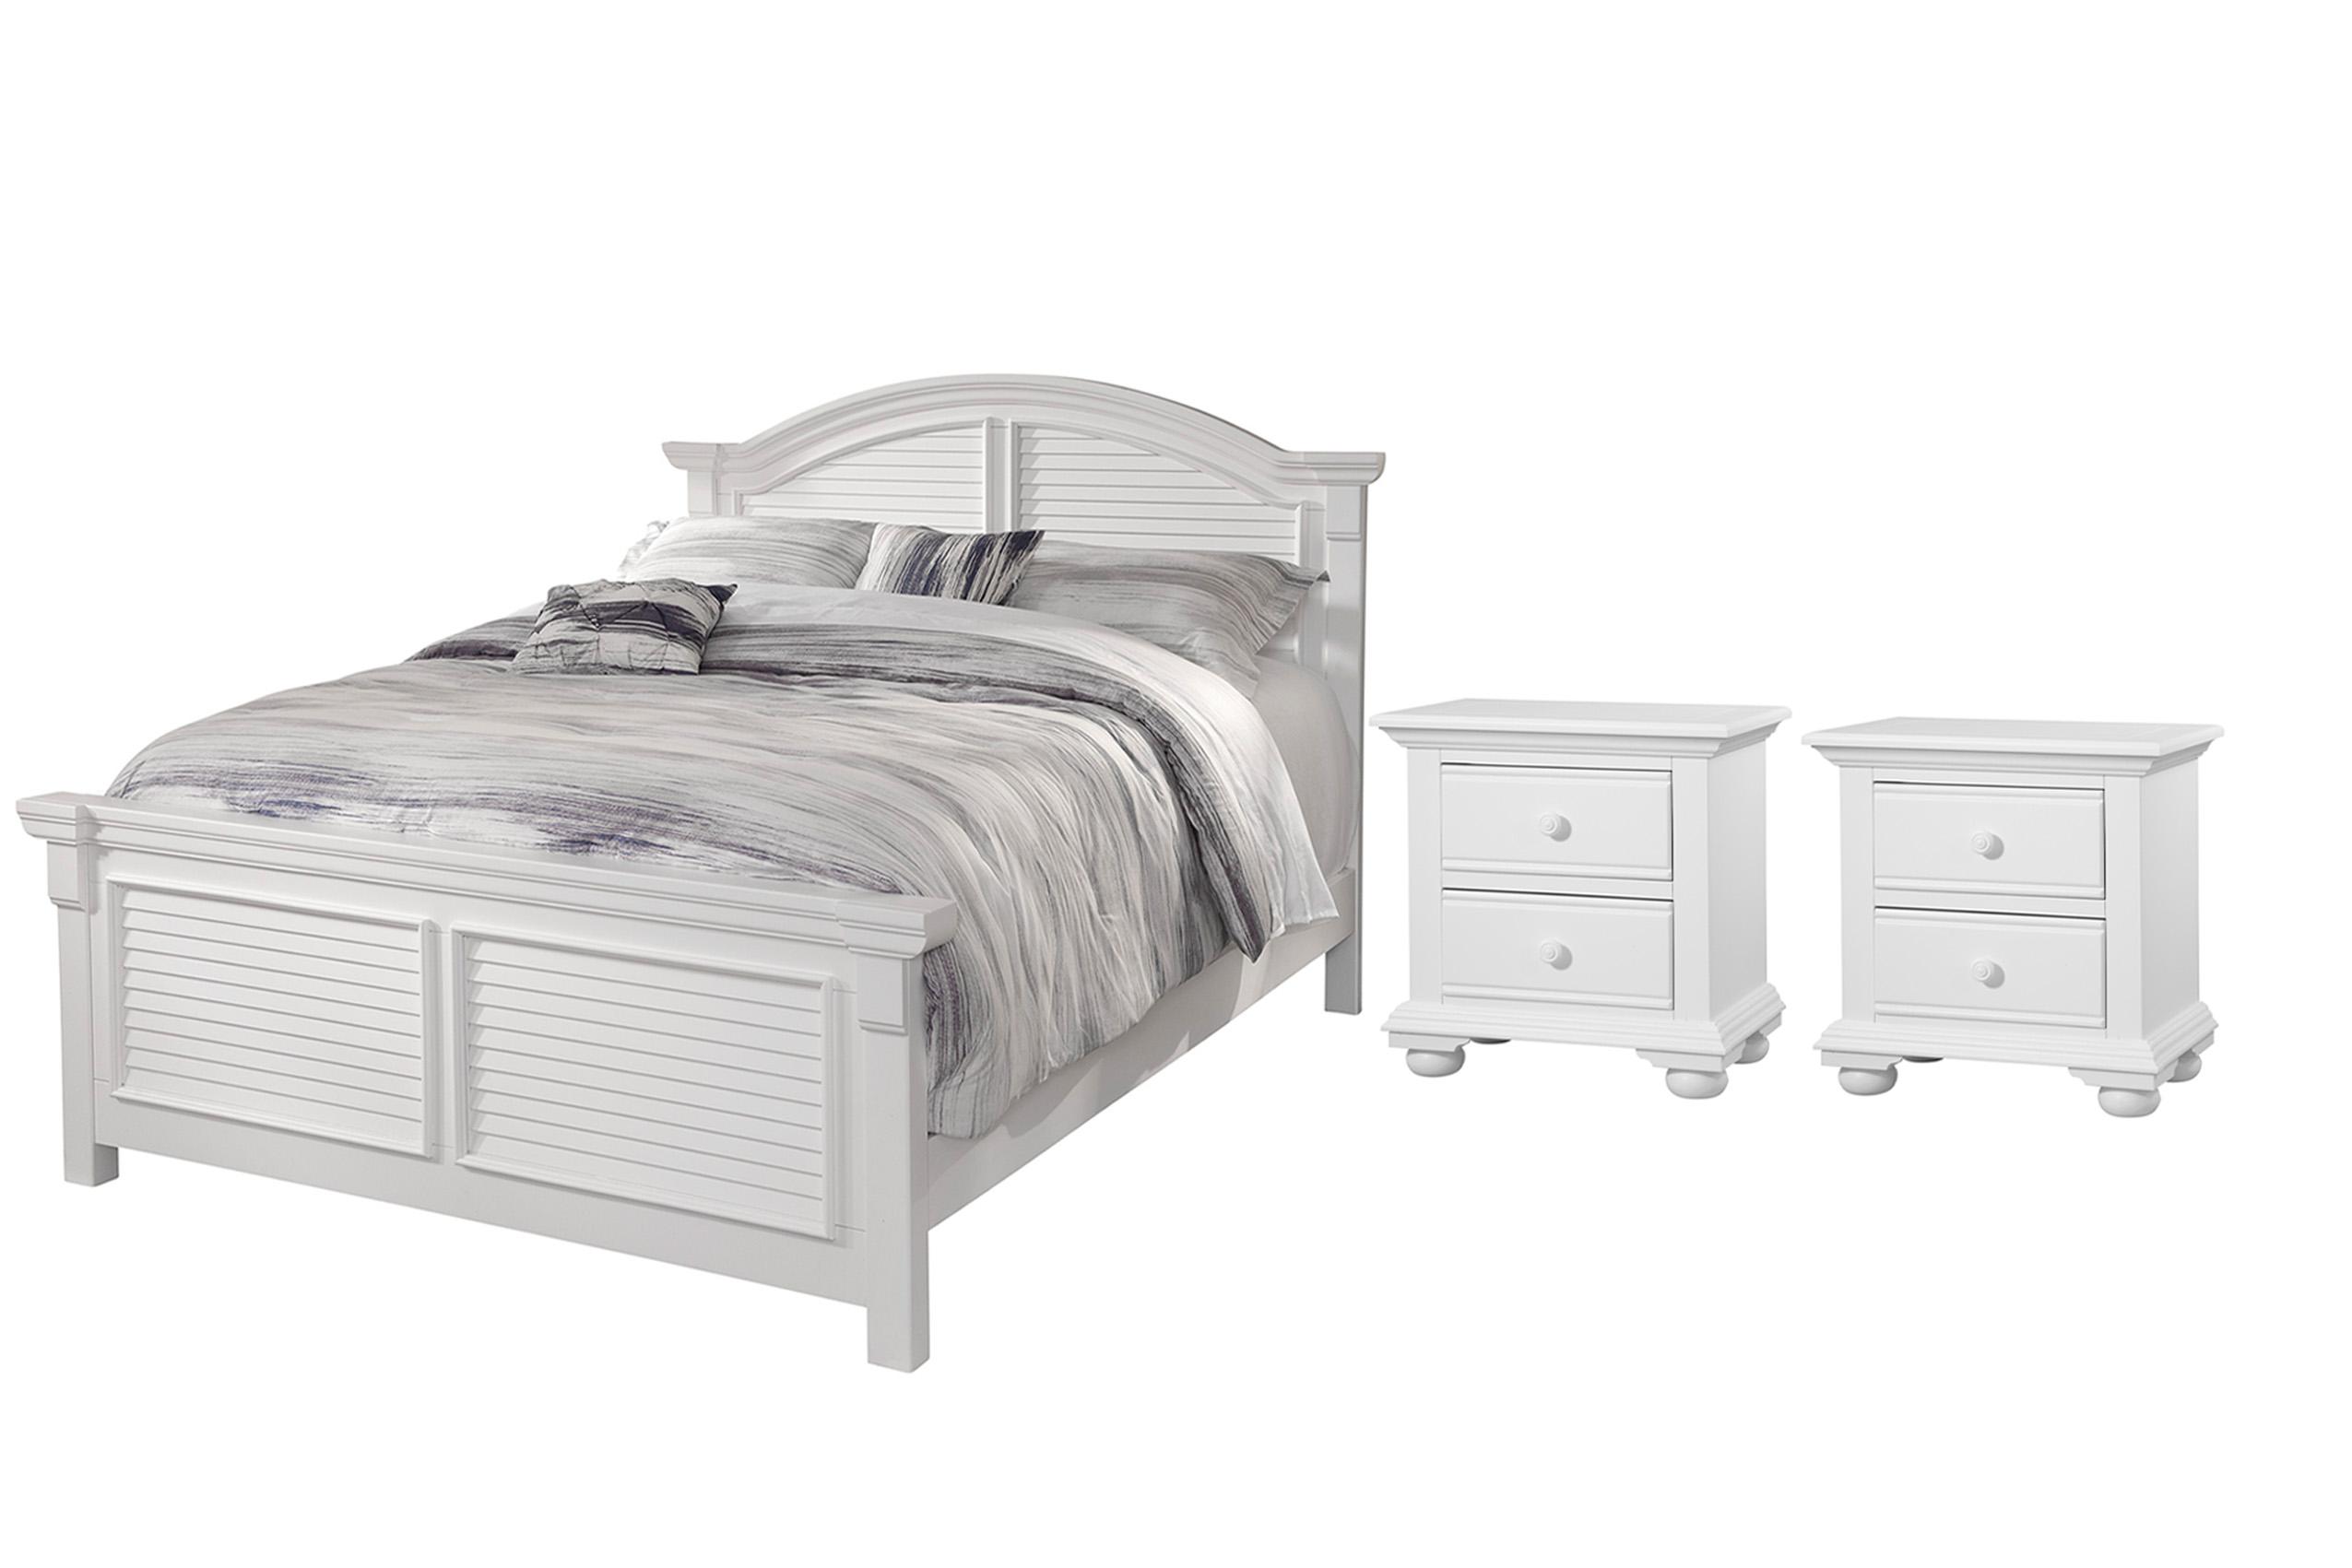 Classic, Traditional, Cottage Panel Bedroom Set COTTAGE 6510-66PAN 6510-66PAN-2N-3PC in White 